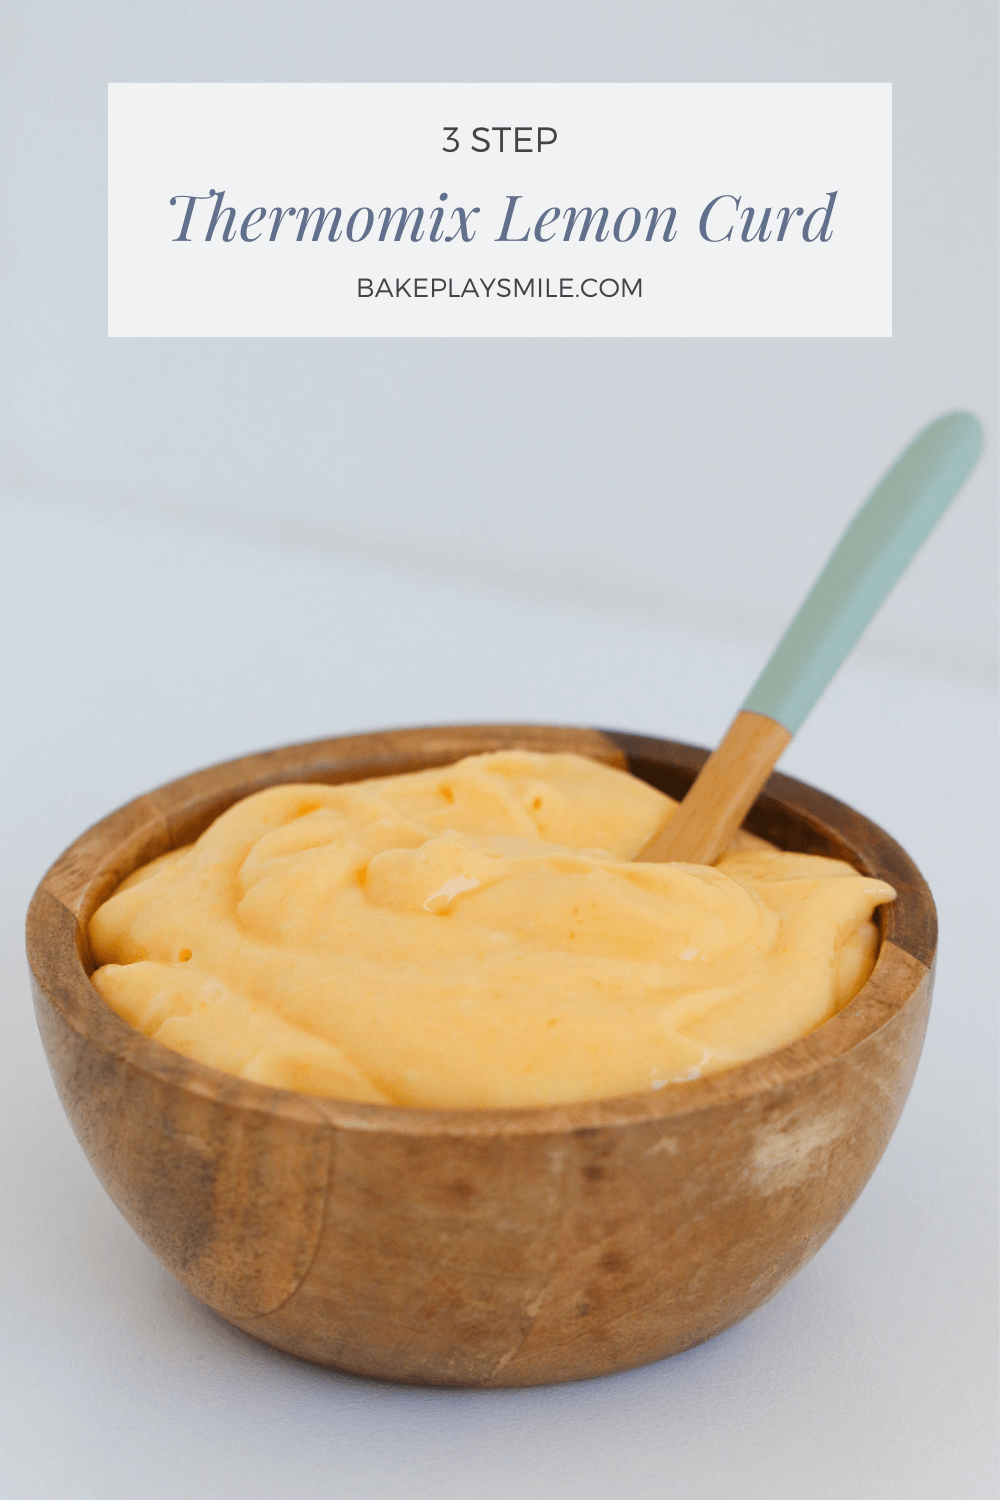 A spoon in a small wooden bowl filled with creamy yellow lemon curd.